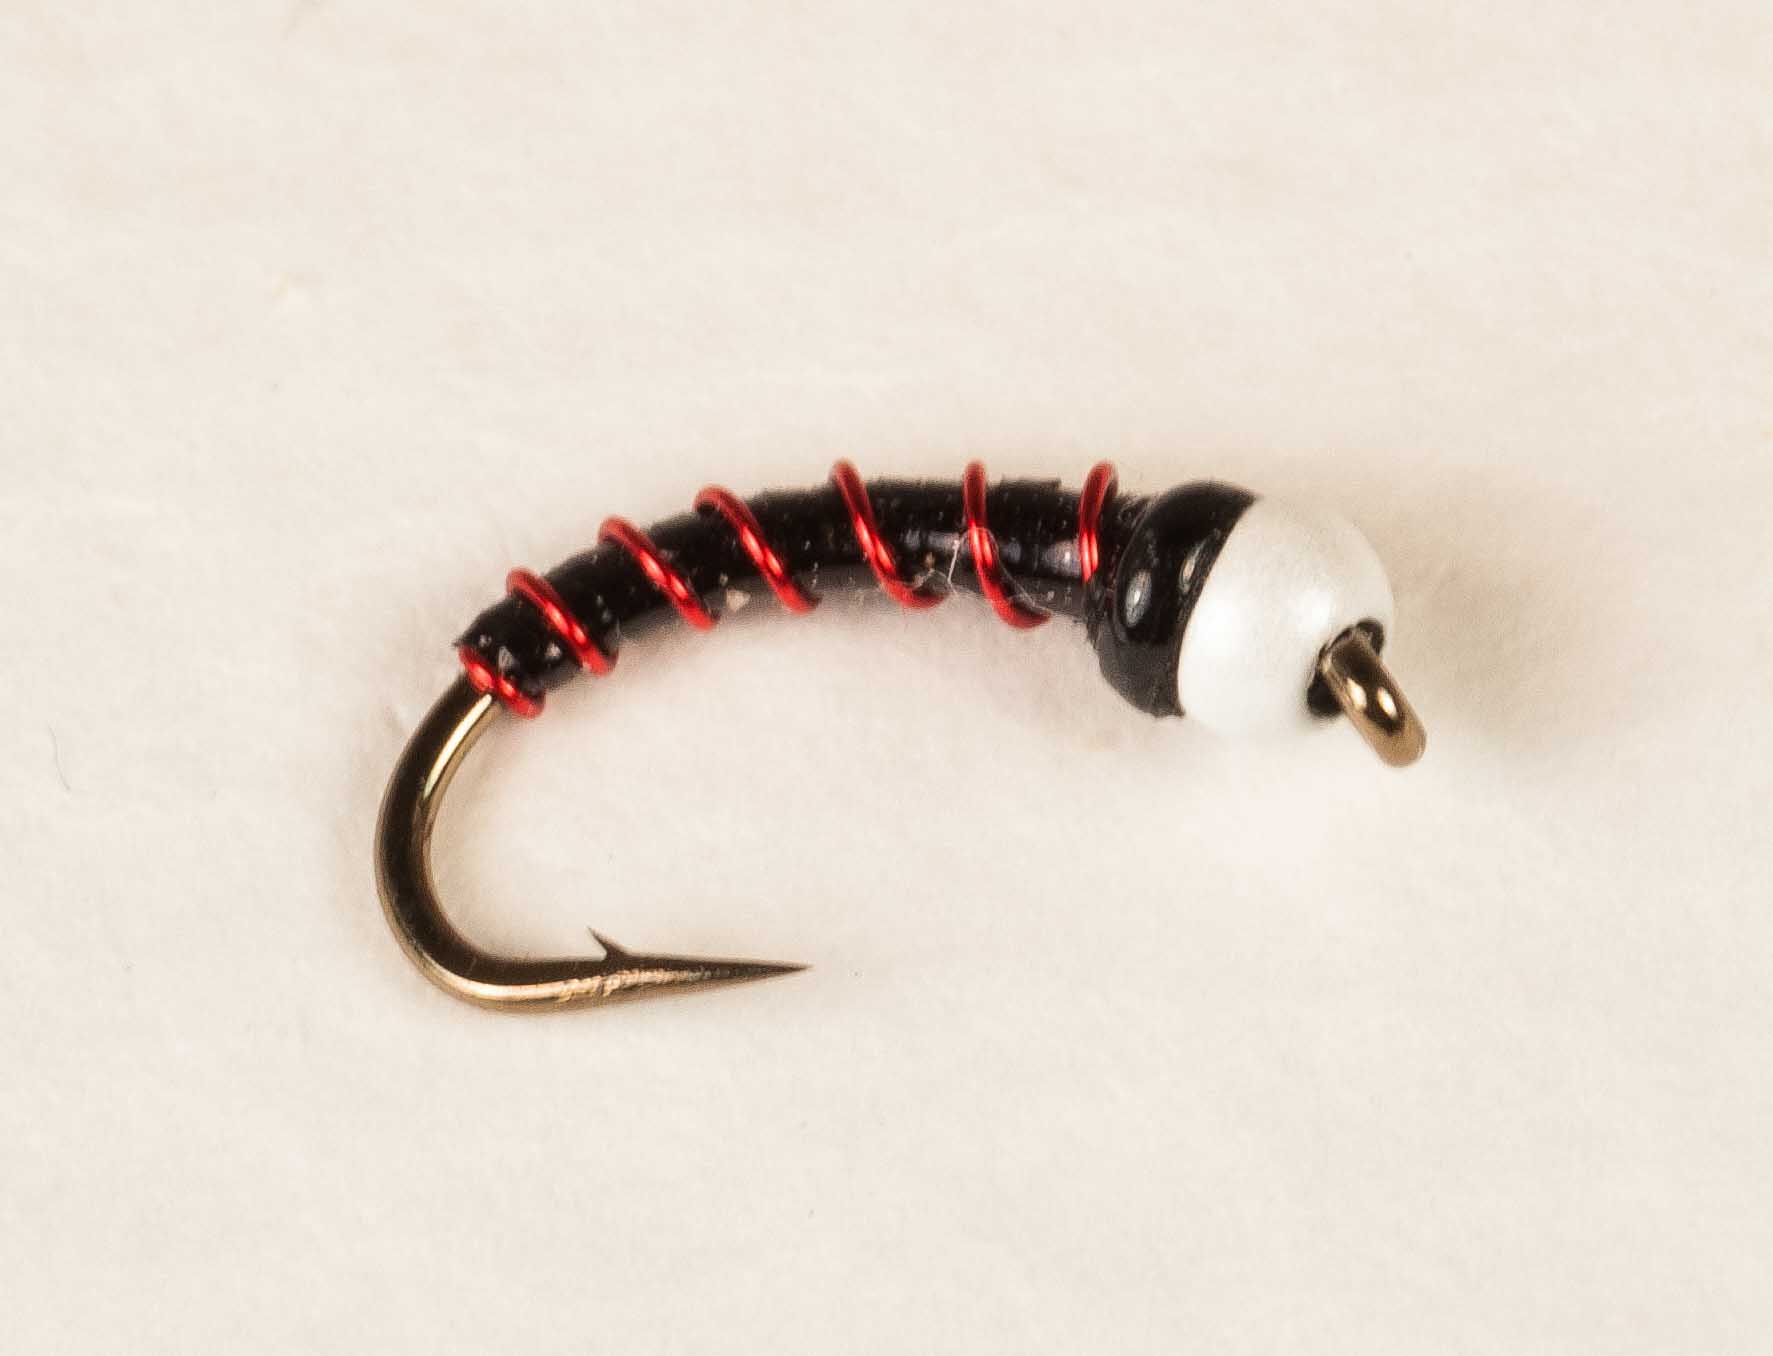 Skip's First Tuesday Tips, Tip 9, Chan's Chironomid Pupa